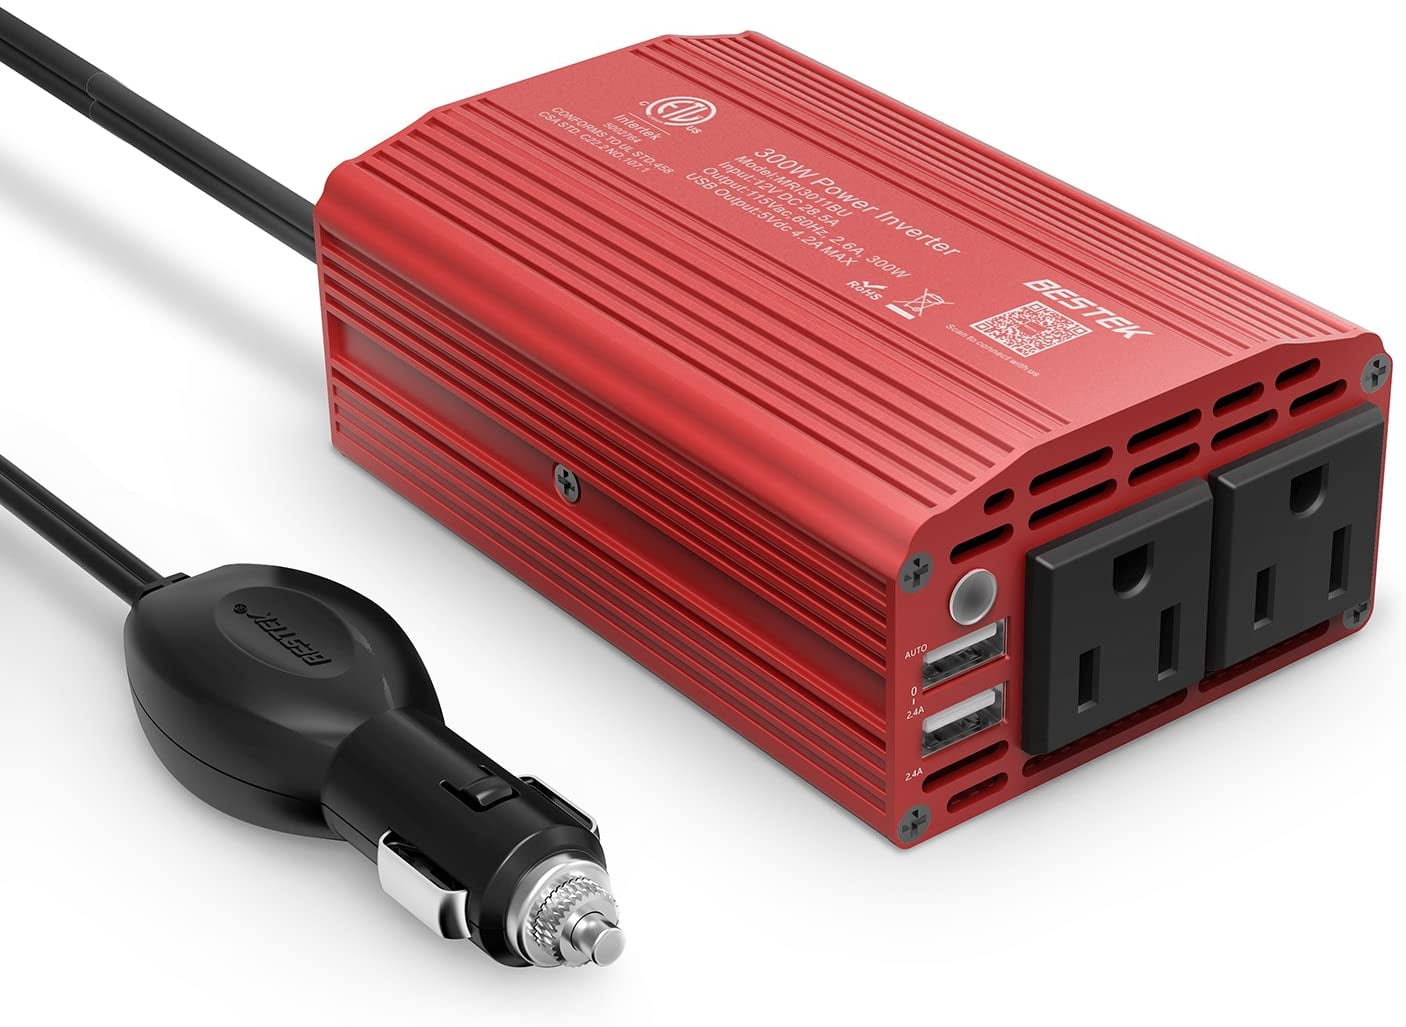 200W-350W Power Inverter for Car DC 12V to AC 110V Outlet 2 USB Adapter Charger 